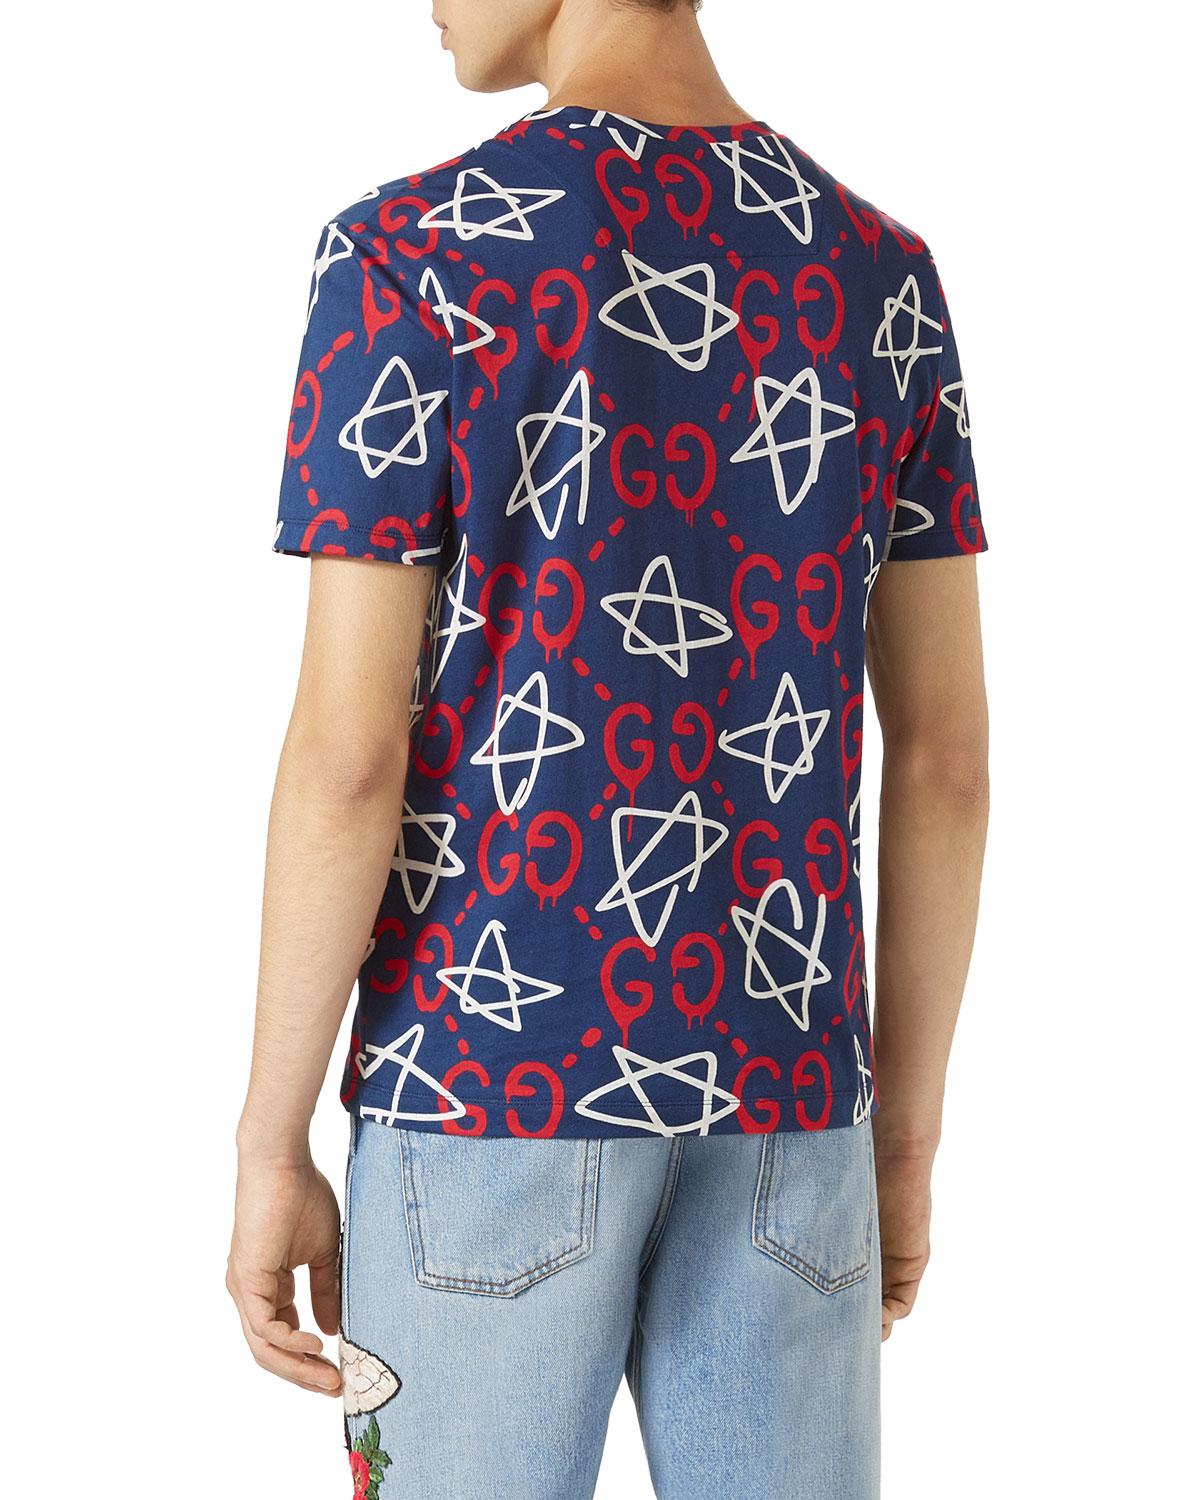 Gucci Ghost-print Crew-neck T-shirt in Blue for Men - Lyst